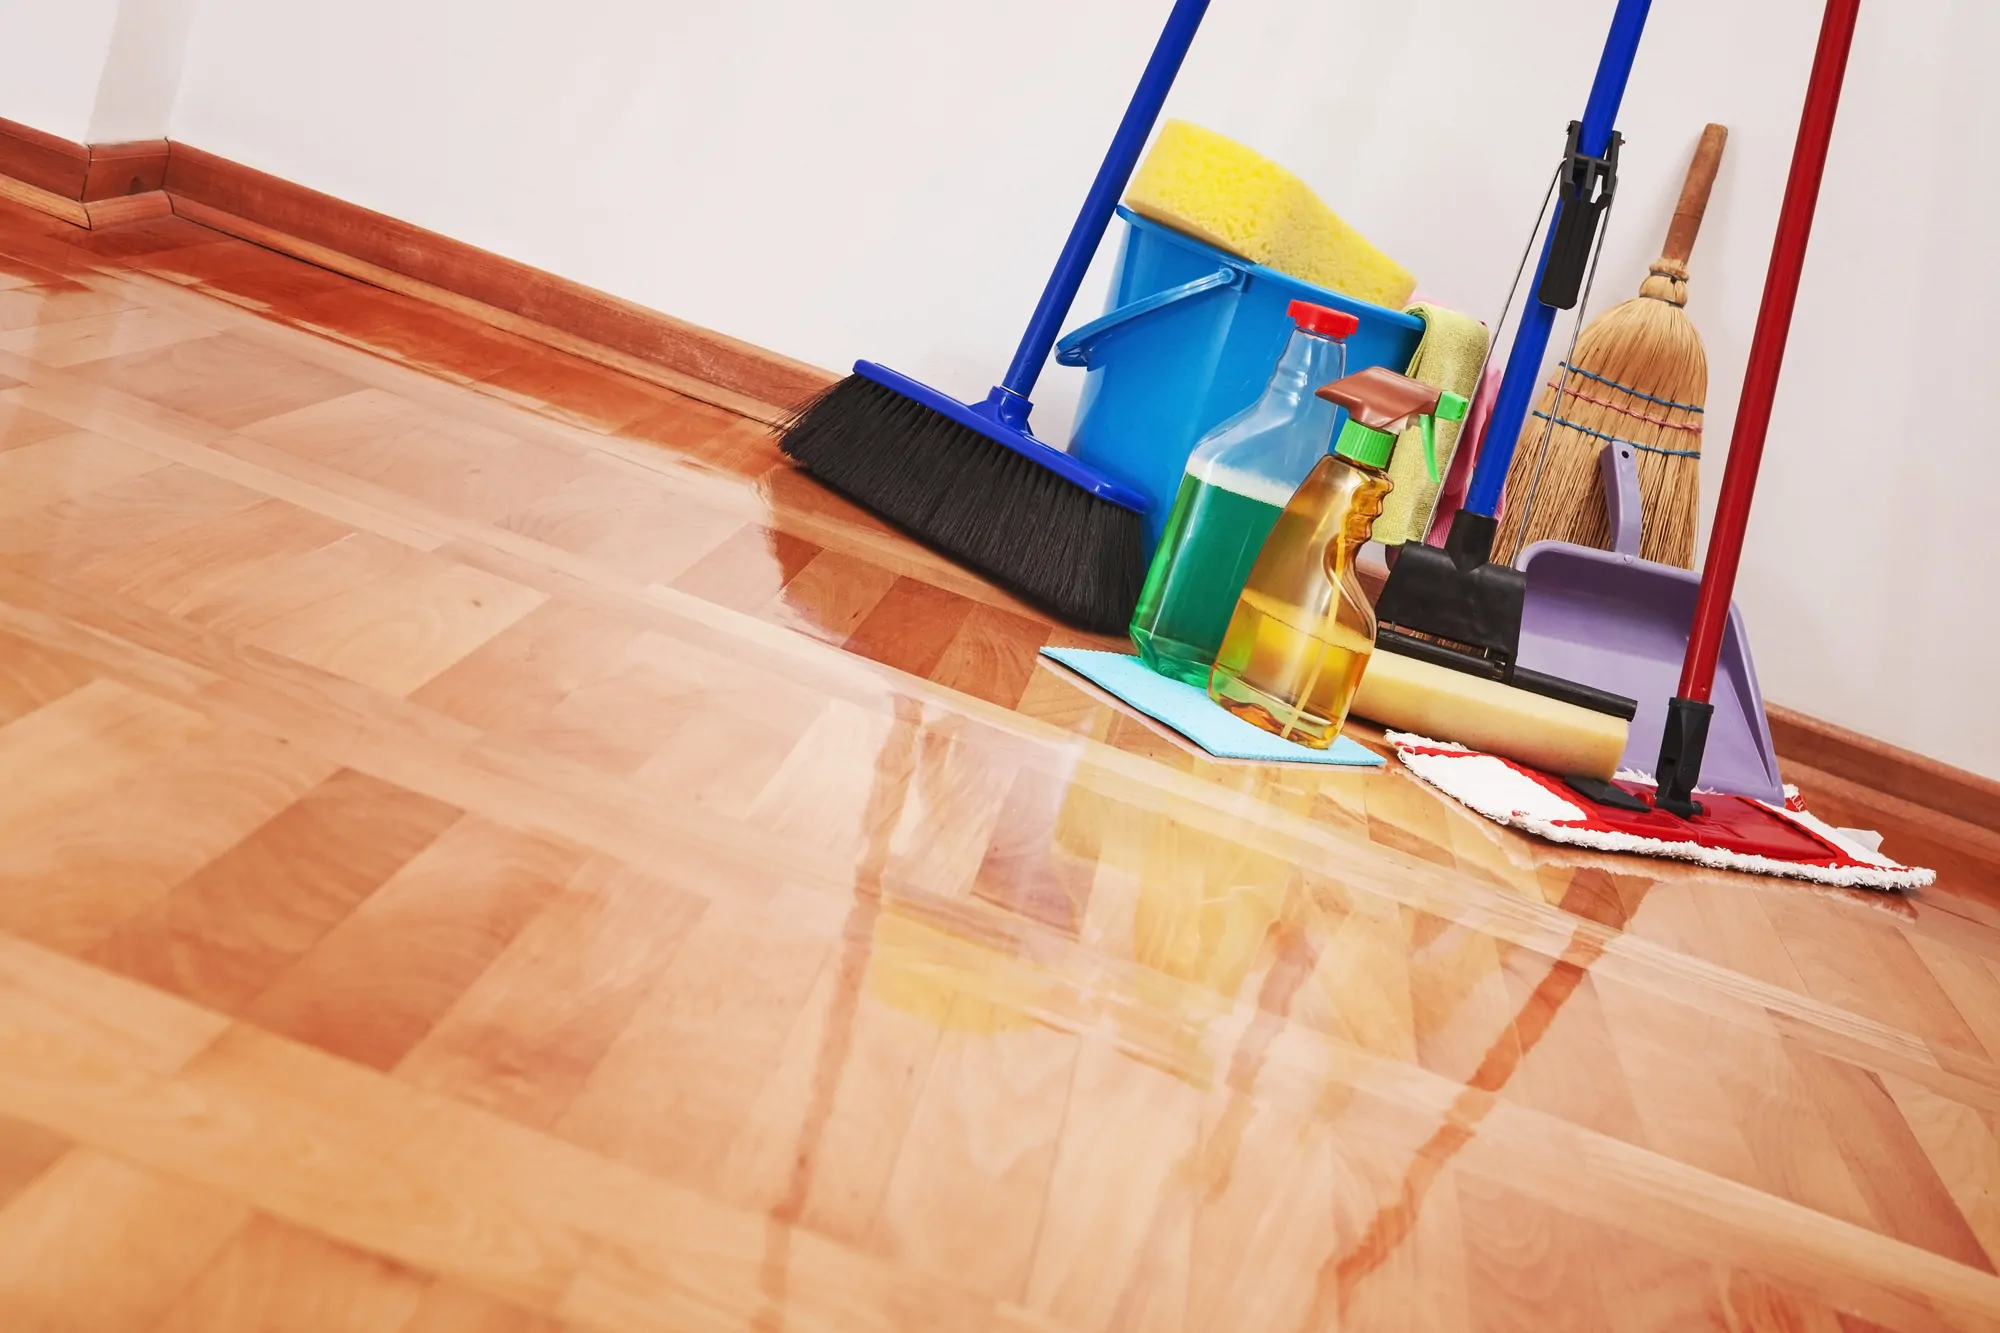 non-toxic cleaning products on the floor